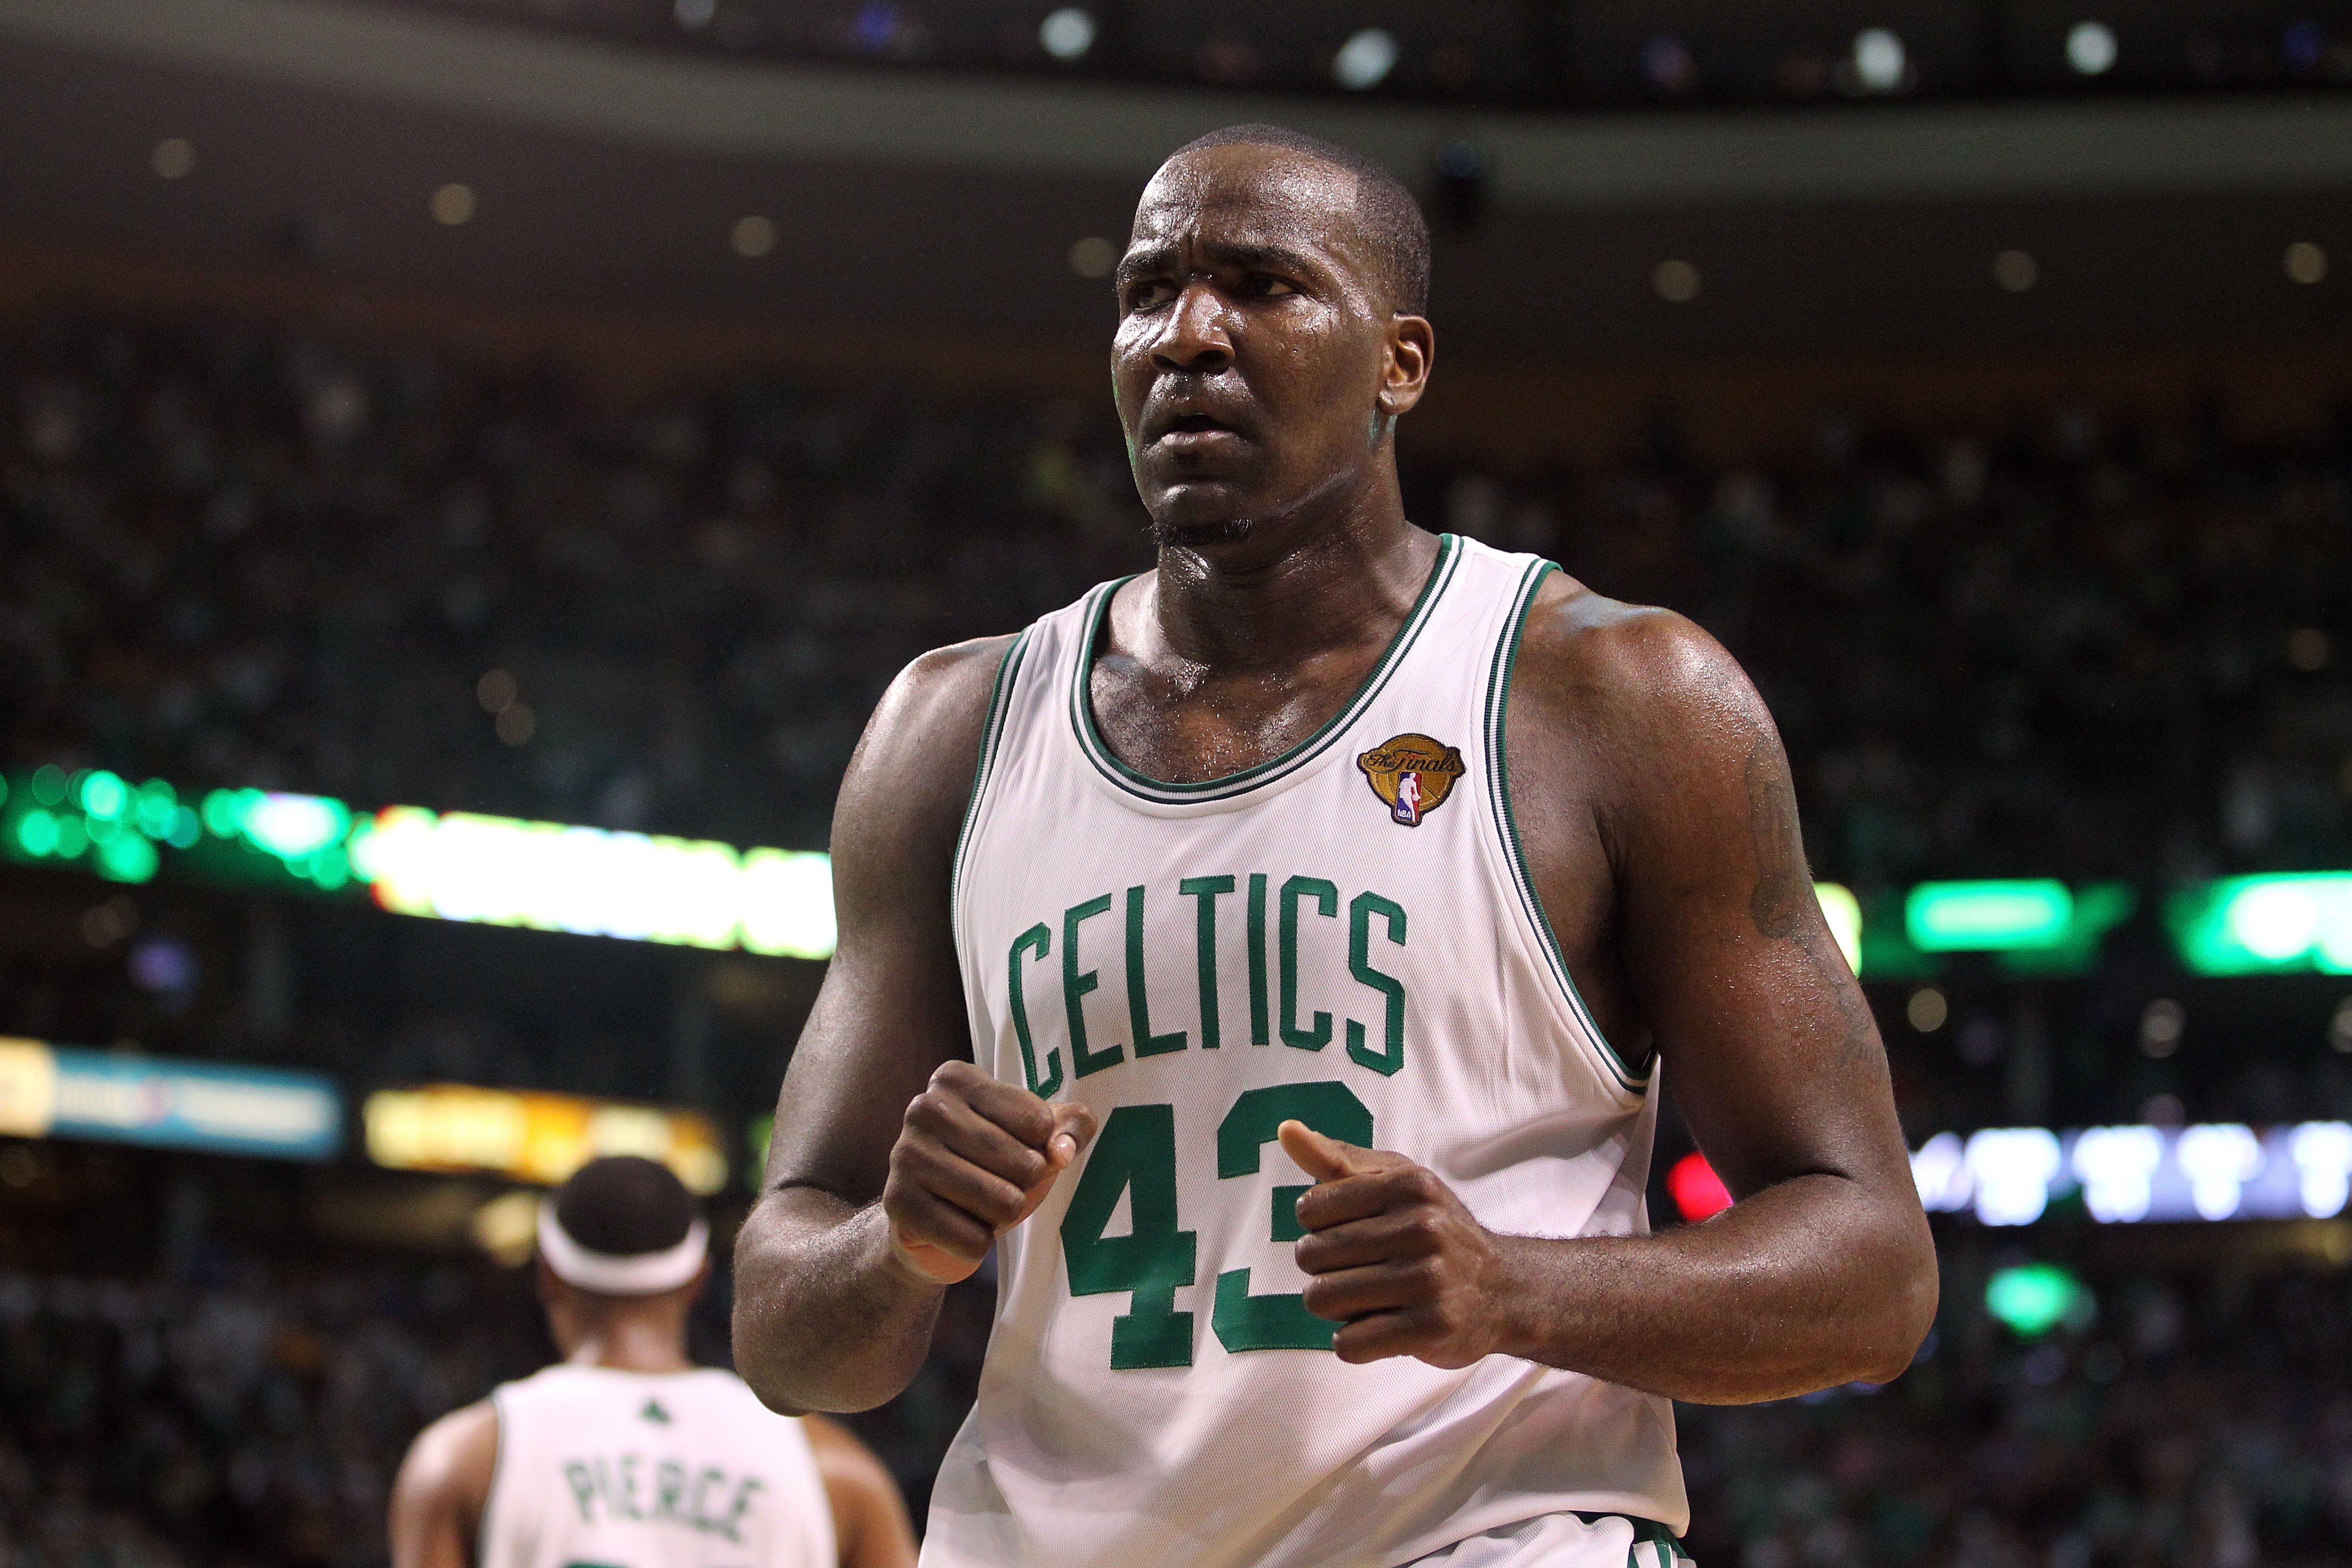 BOSTON - JUNE 10:  Kendrick Perkins #43 of the Boston Celtics looks on against the Los Angeles Lakers during Game Four of the 2010 NBA Finals on June 10, 2010 at TD Garden in Boston, Massachusetts. The Celtics won 96-89. NOTE TO USER: User expressly ackno